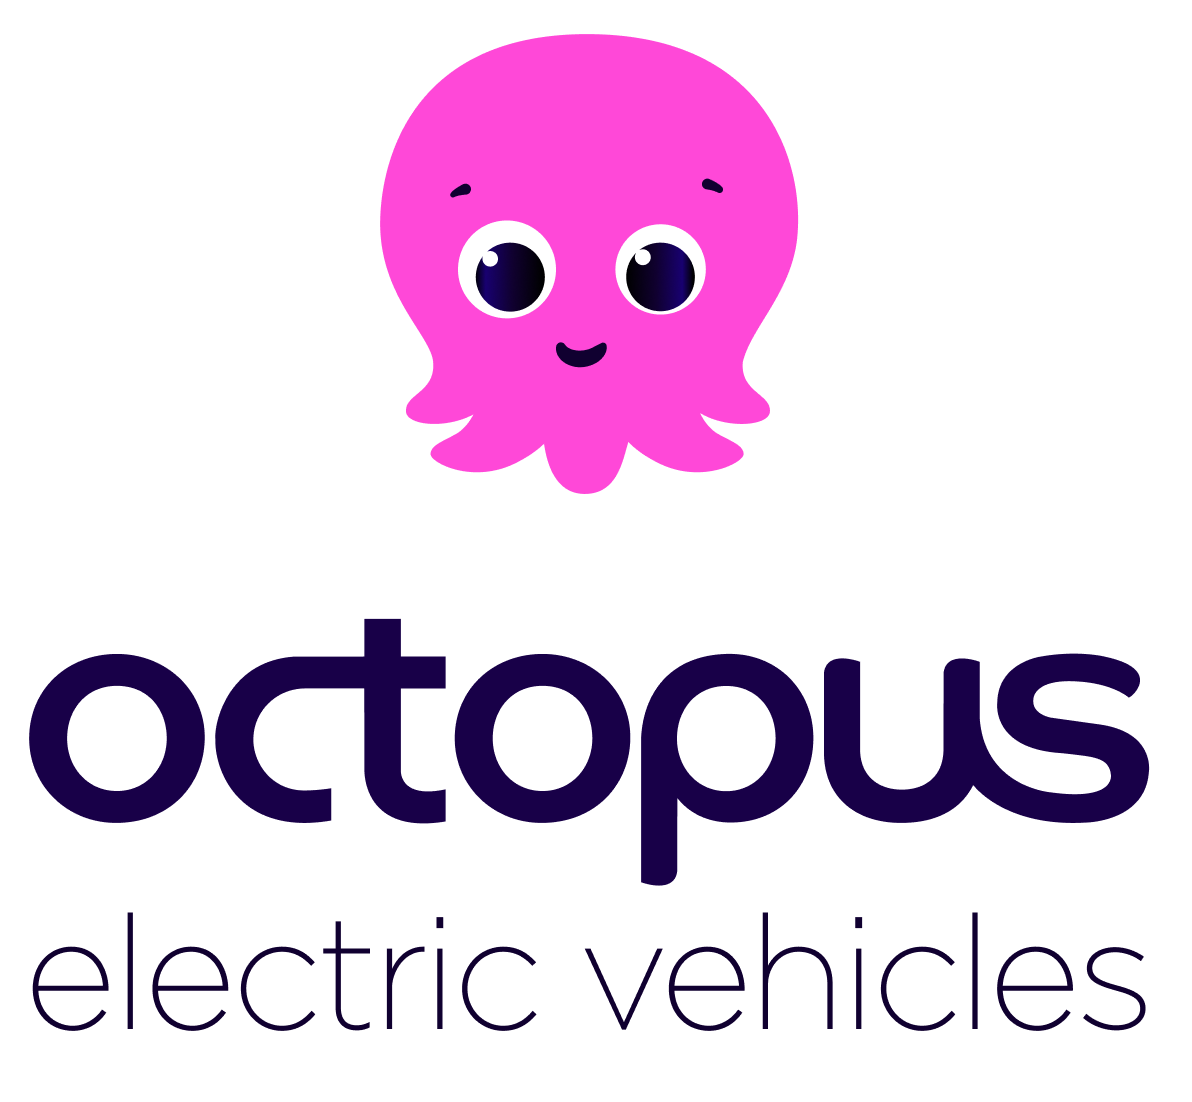 Octopus Electric Vehicles Limited